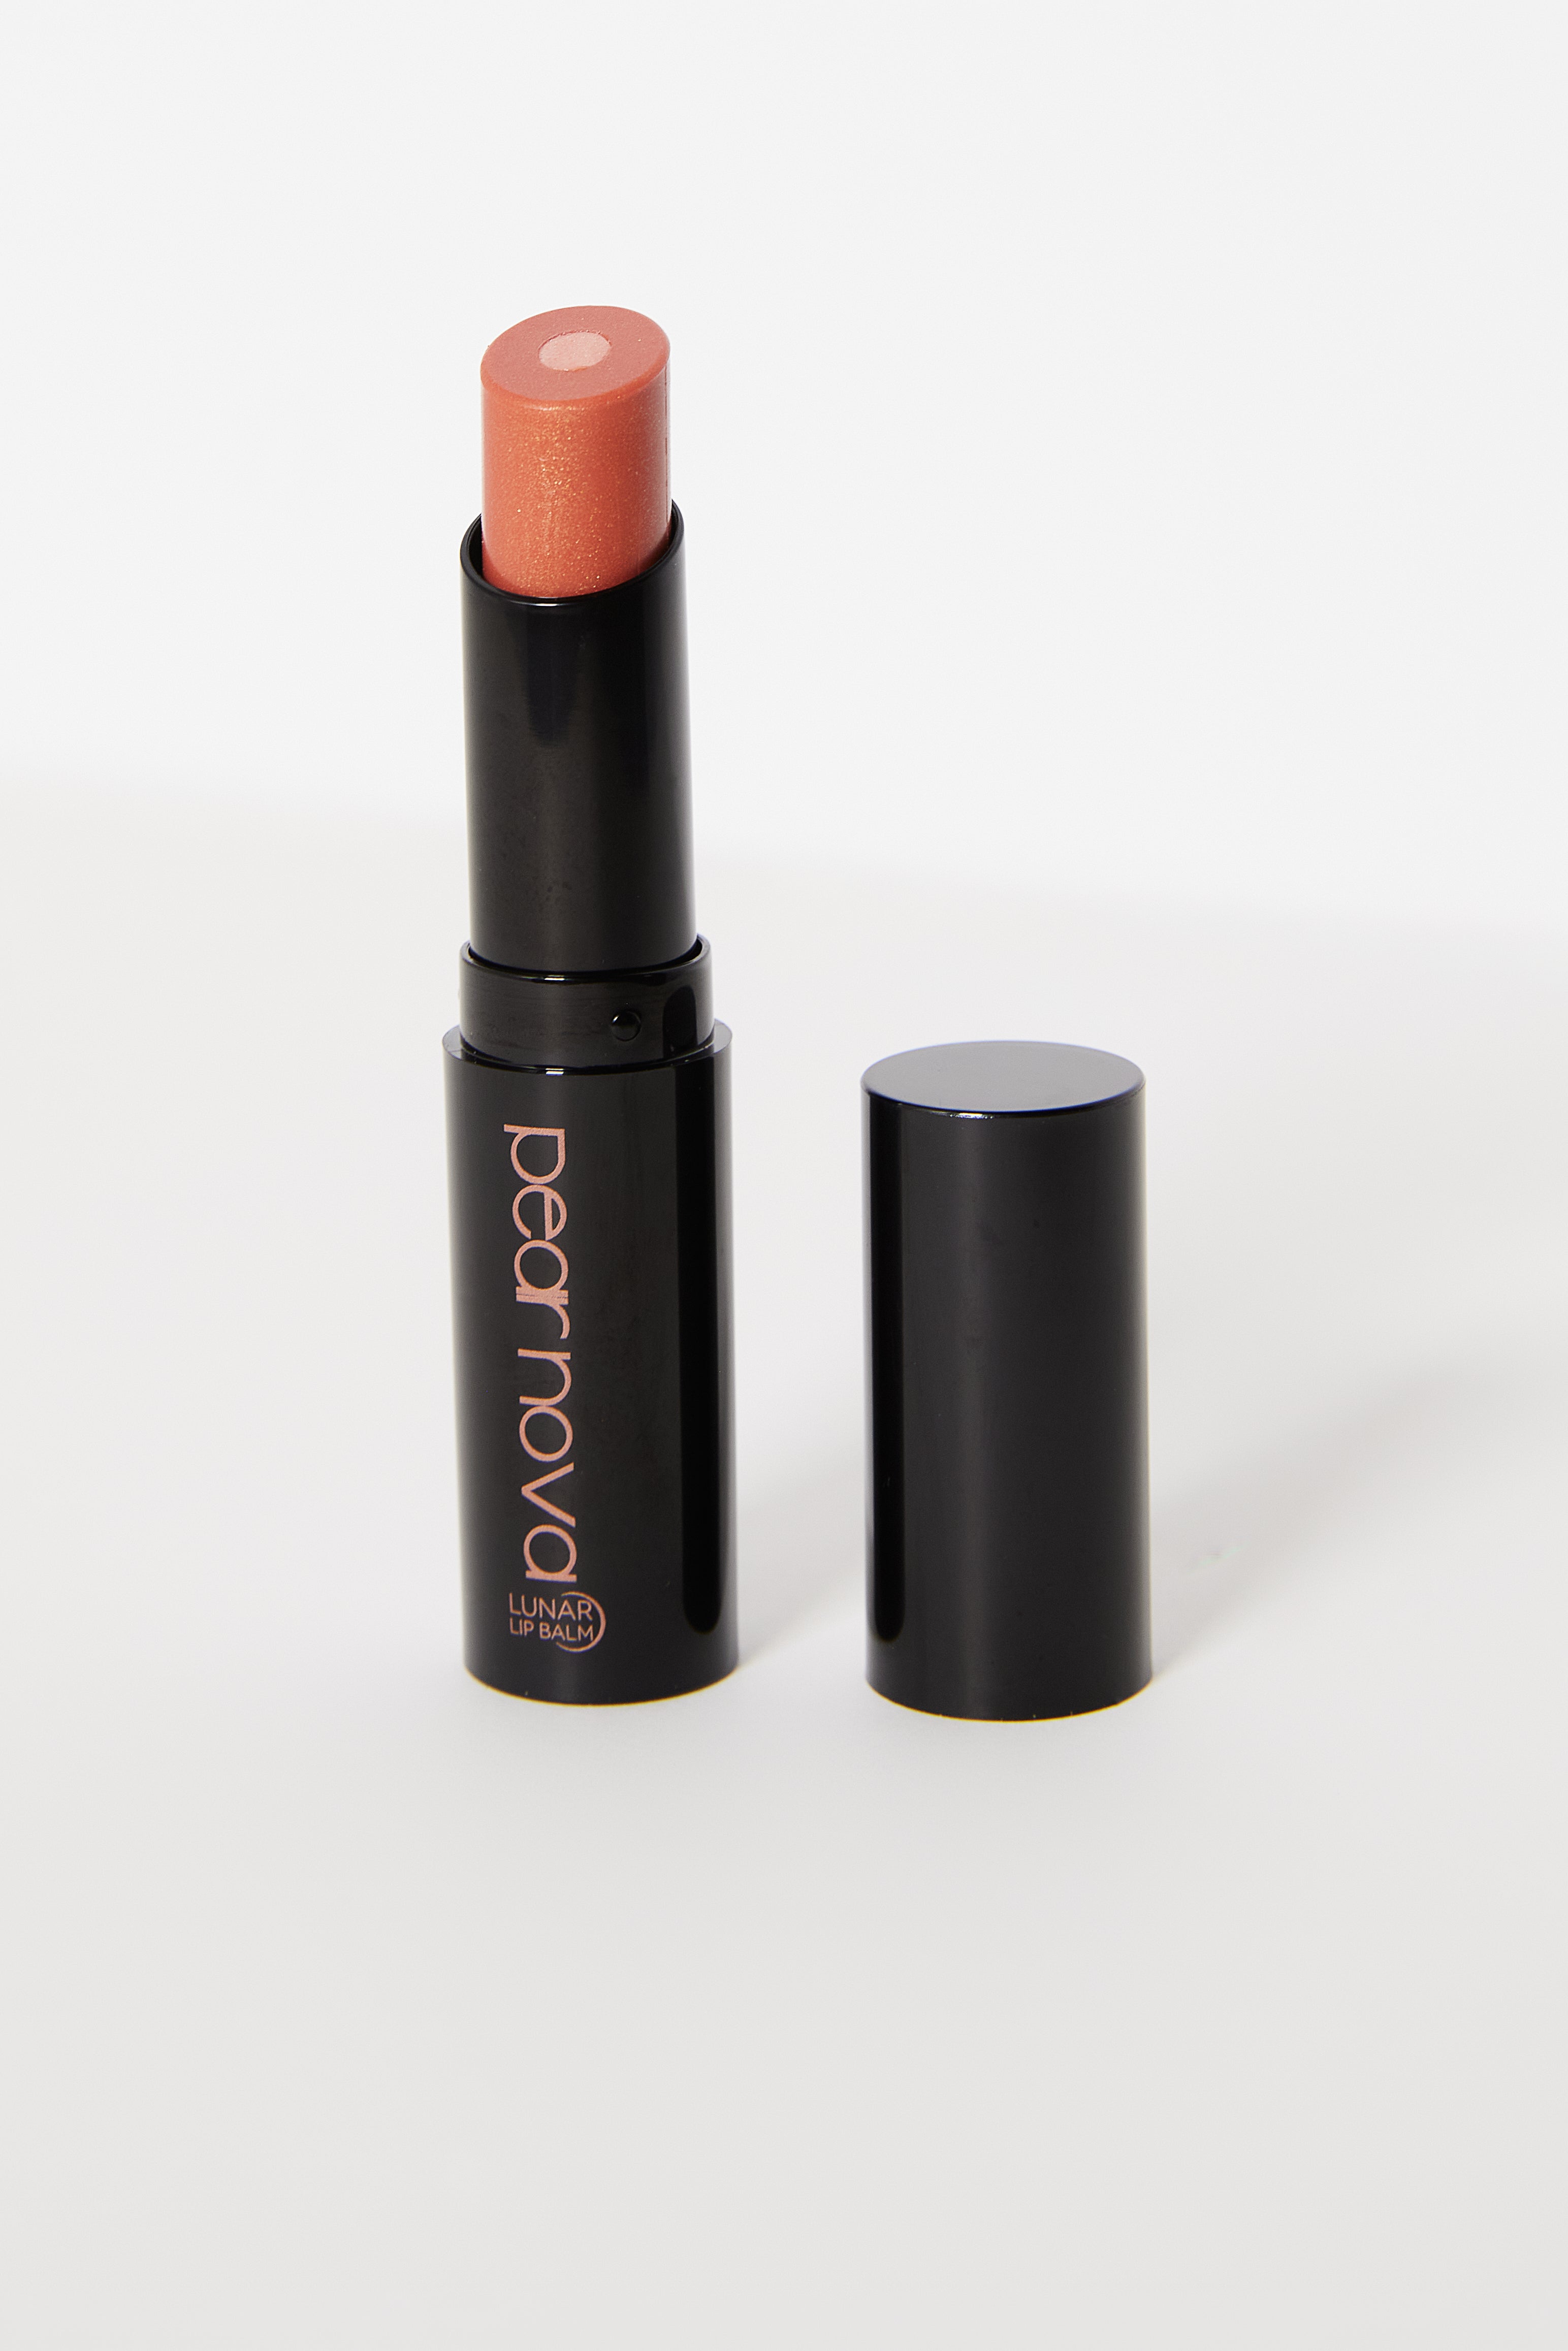 Orbit Lip balm with cap off showing moisturizing balm and shimmery inner core